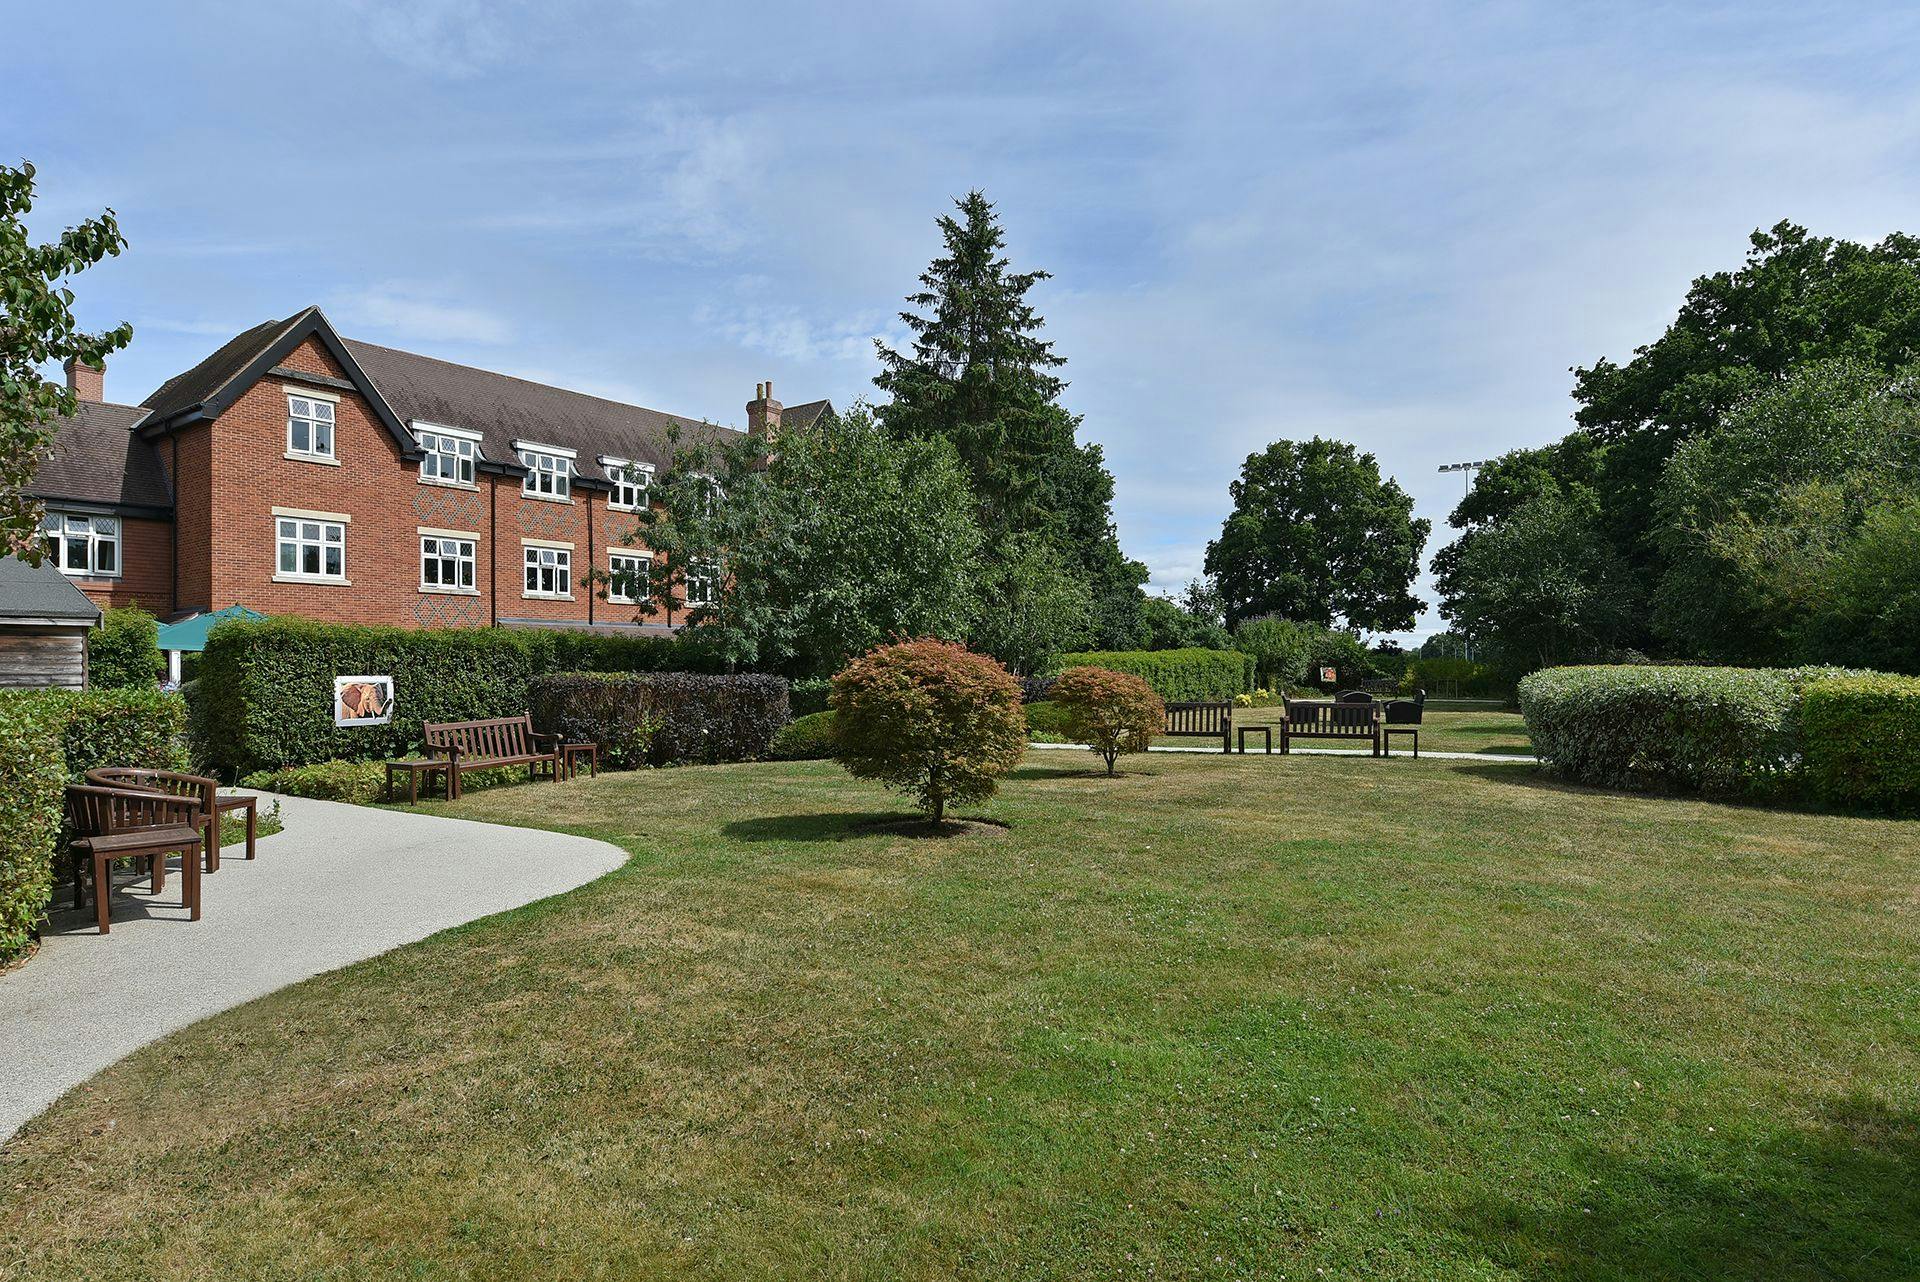 Garden at Sonning Gardens care home in Sonning, Berkshire